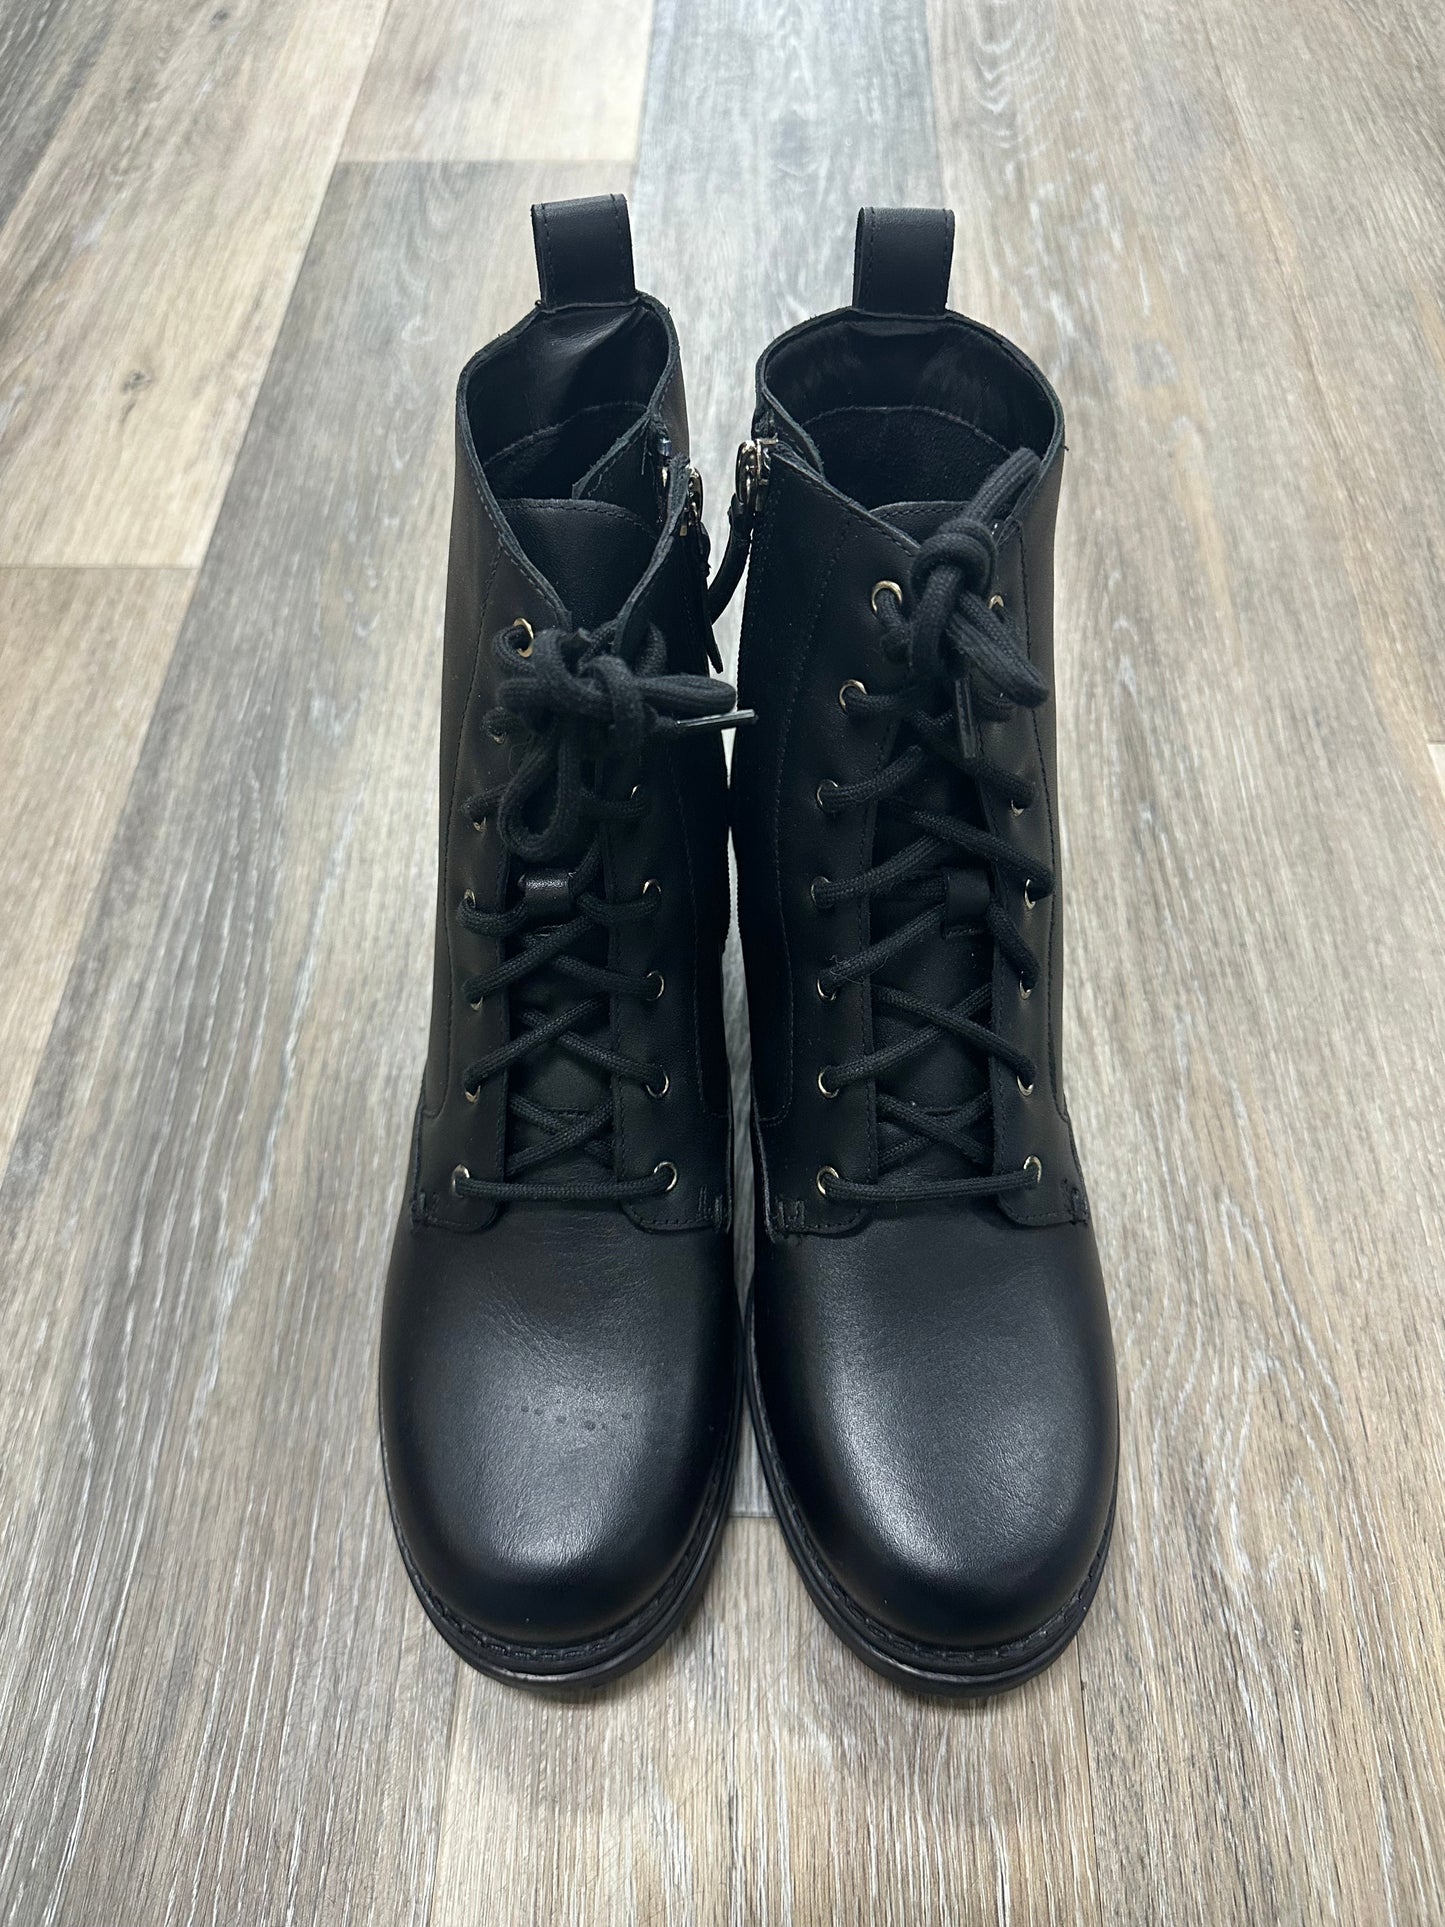 Boots Designer By Cole-haan  Size: 9